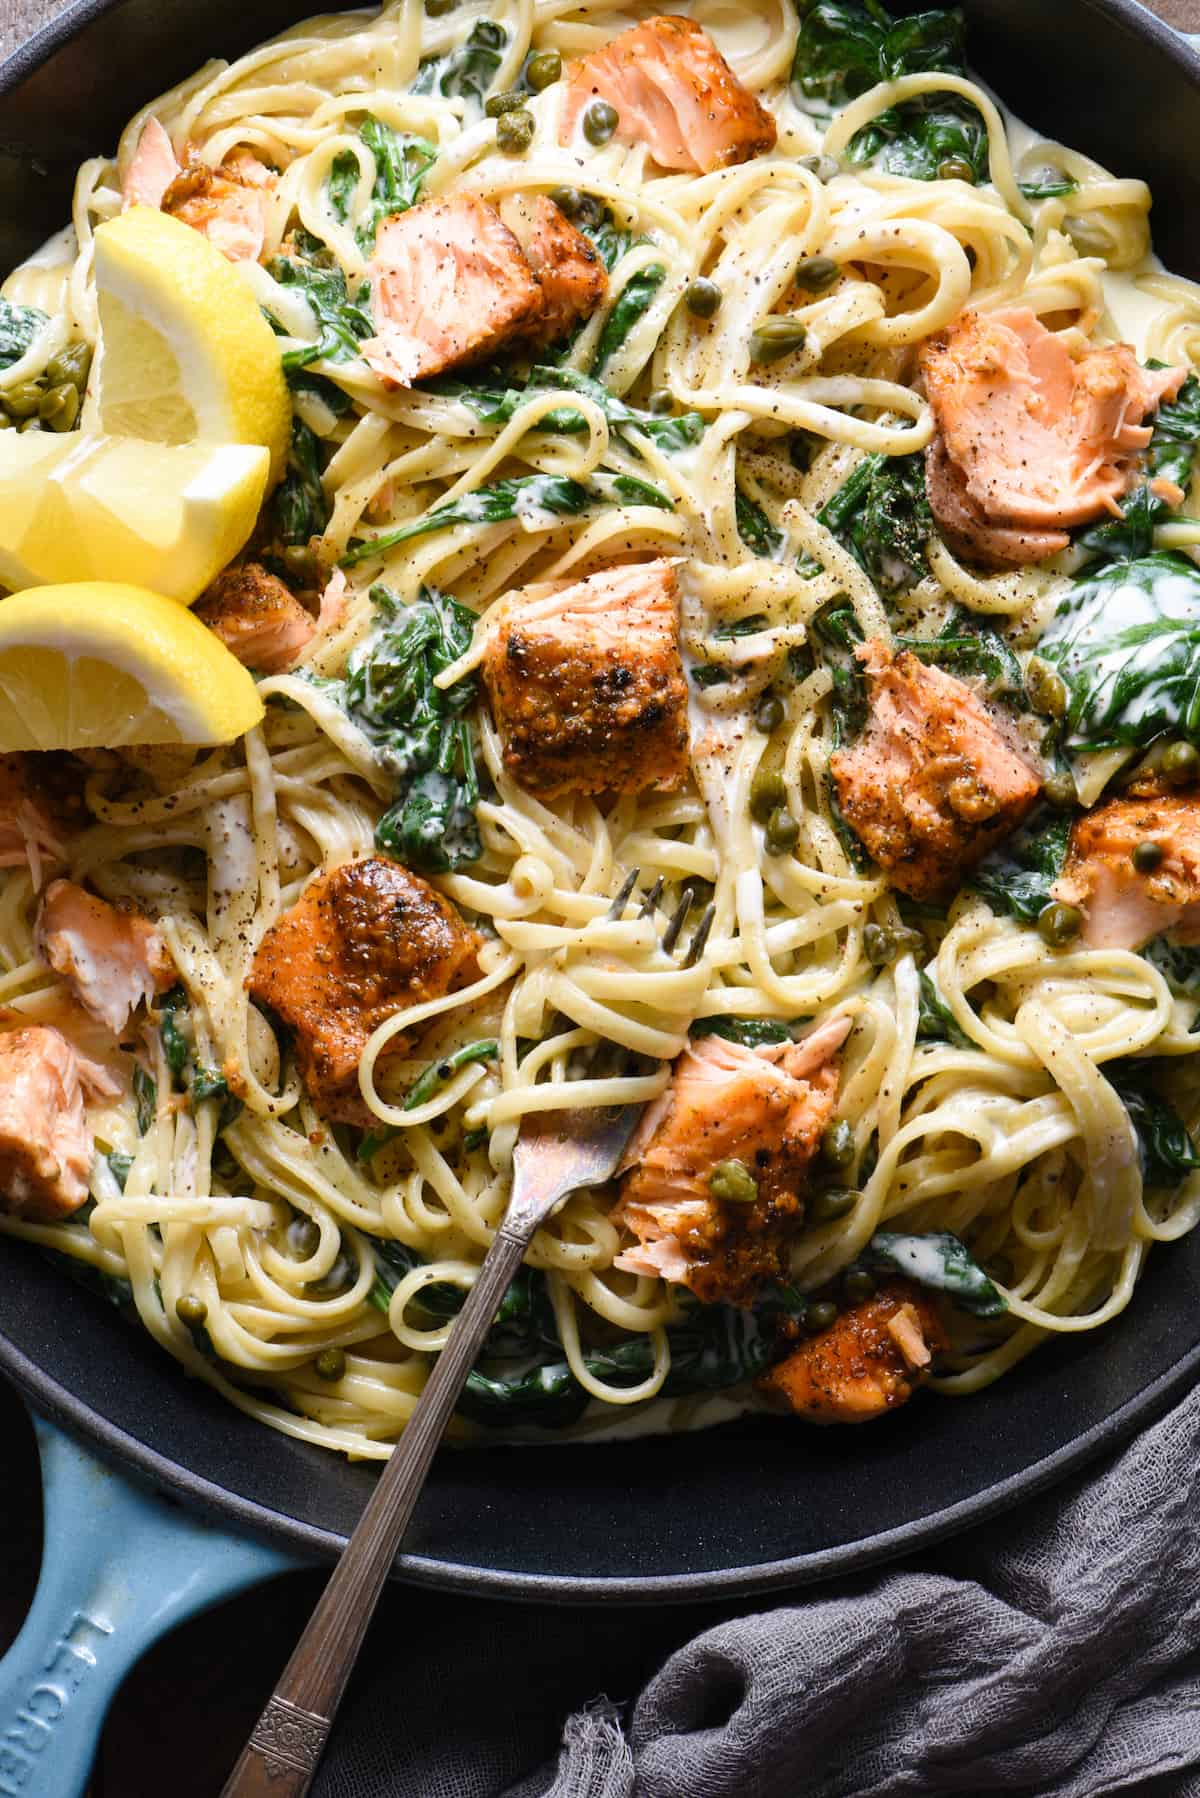 Closeup on a fork twirling a bite of creamy salmon pasta. Spinach and capers dot the pasta dish.